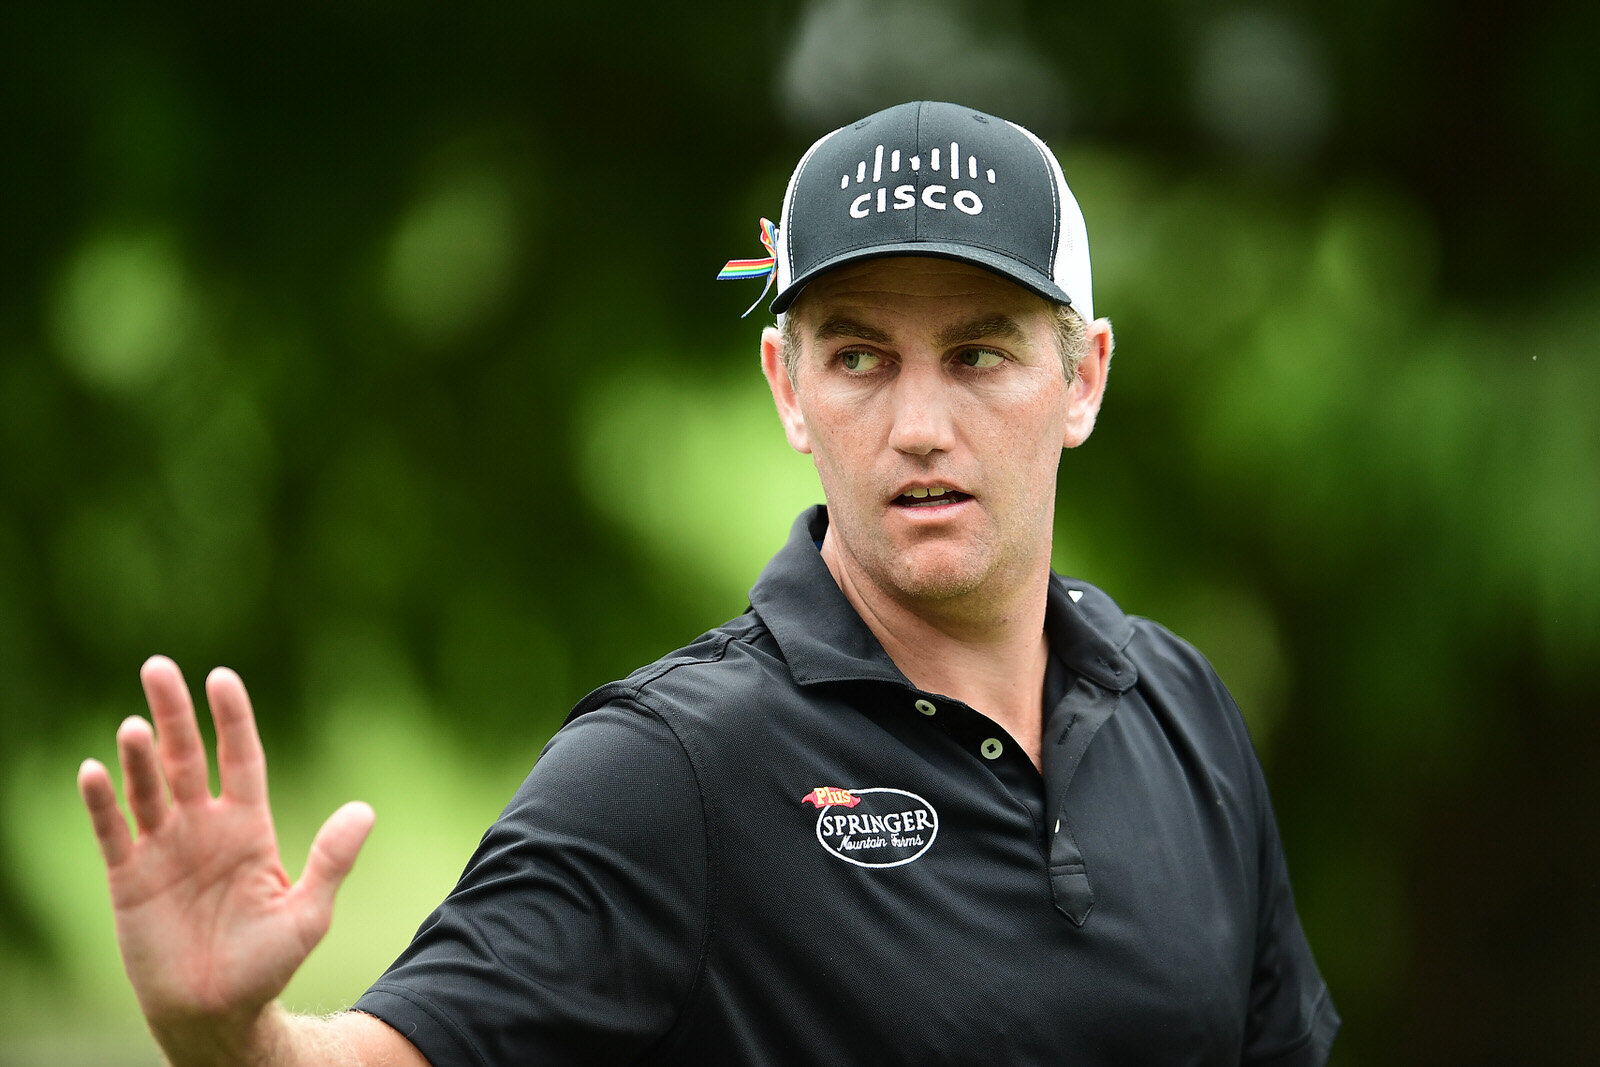  MEMPHIS, TENNESSEE - AUGUST 01: Brendon Todd of the United States reacts on the 12th hole during the third round of the World Golf Championship-FedEx St Jude Invitational at TPC Southwind on August 01, 2020 in Memphis, Tennessee. (Photo by Stacy Rev